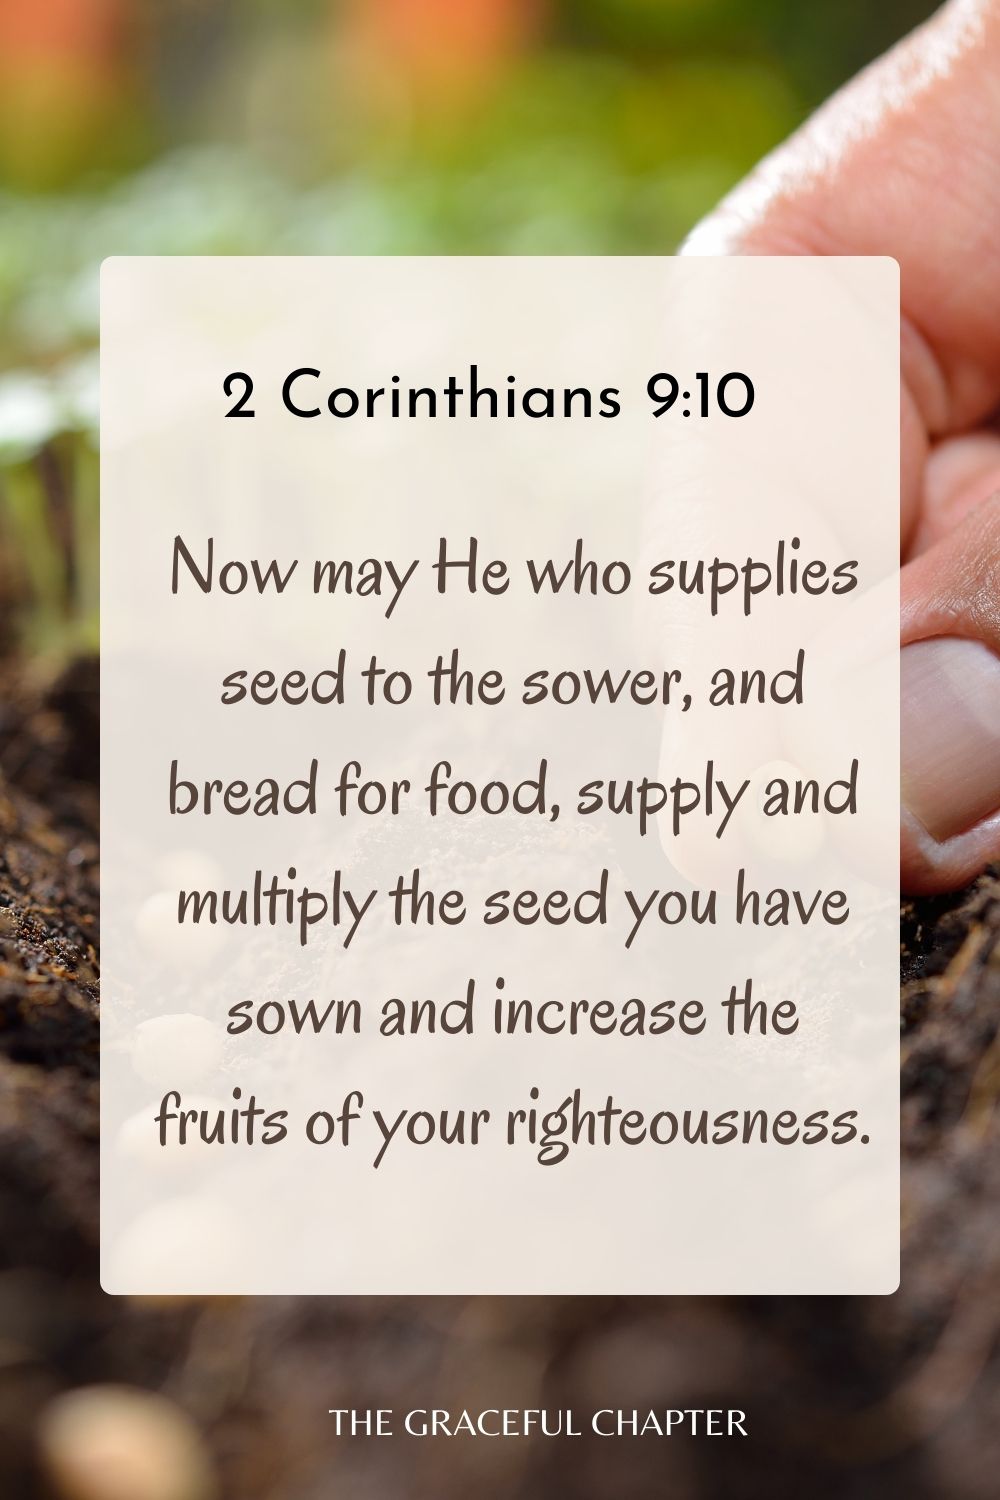 Now may He who supplies seed to the sower, and bread for food, supply and multiply the seed you have sown and increase the fruits of your righteousness. 2 Corinthians 9:10